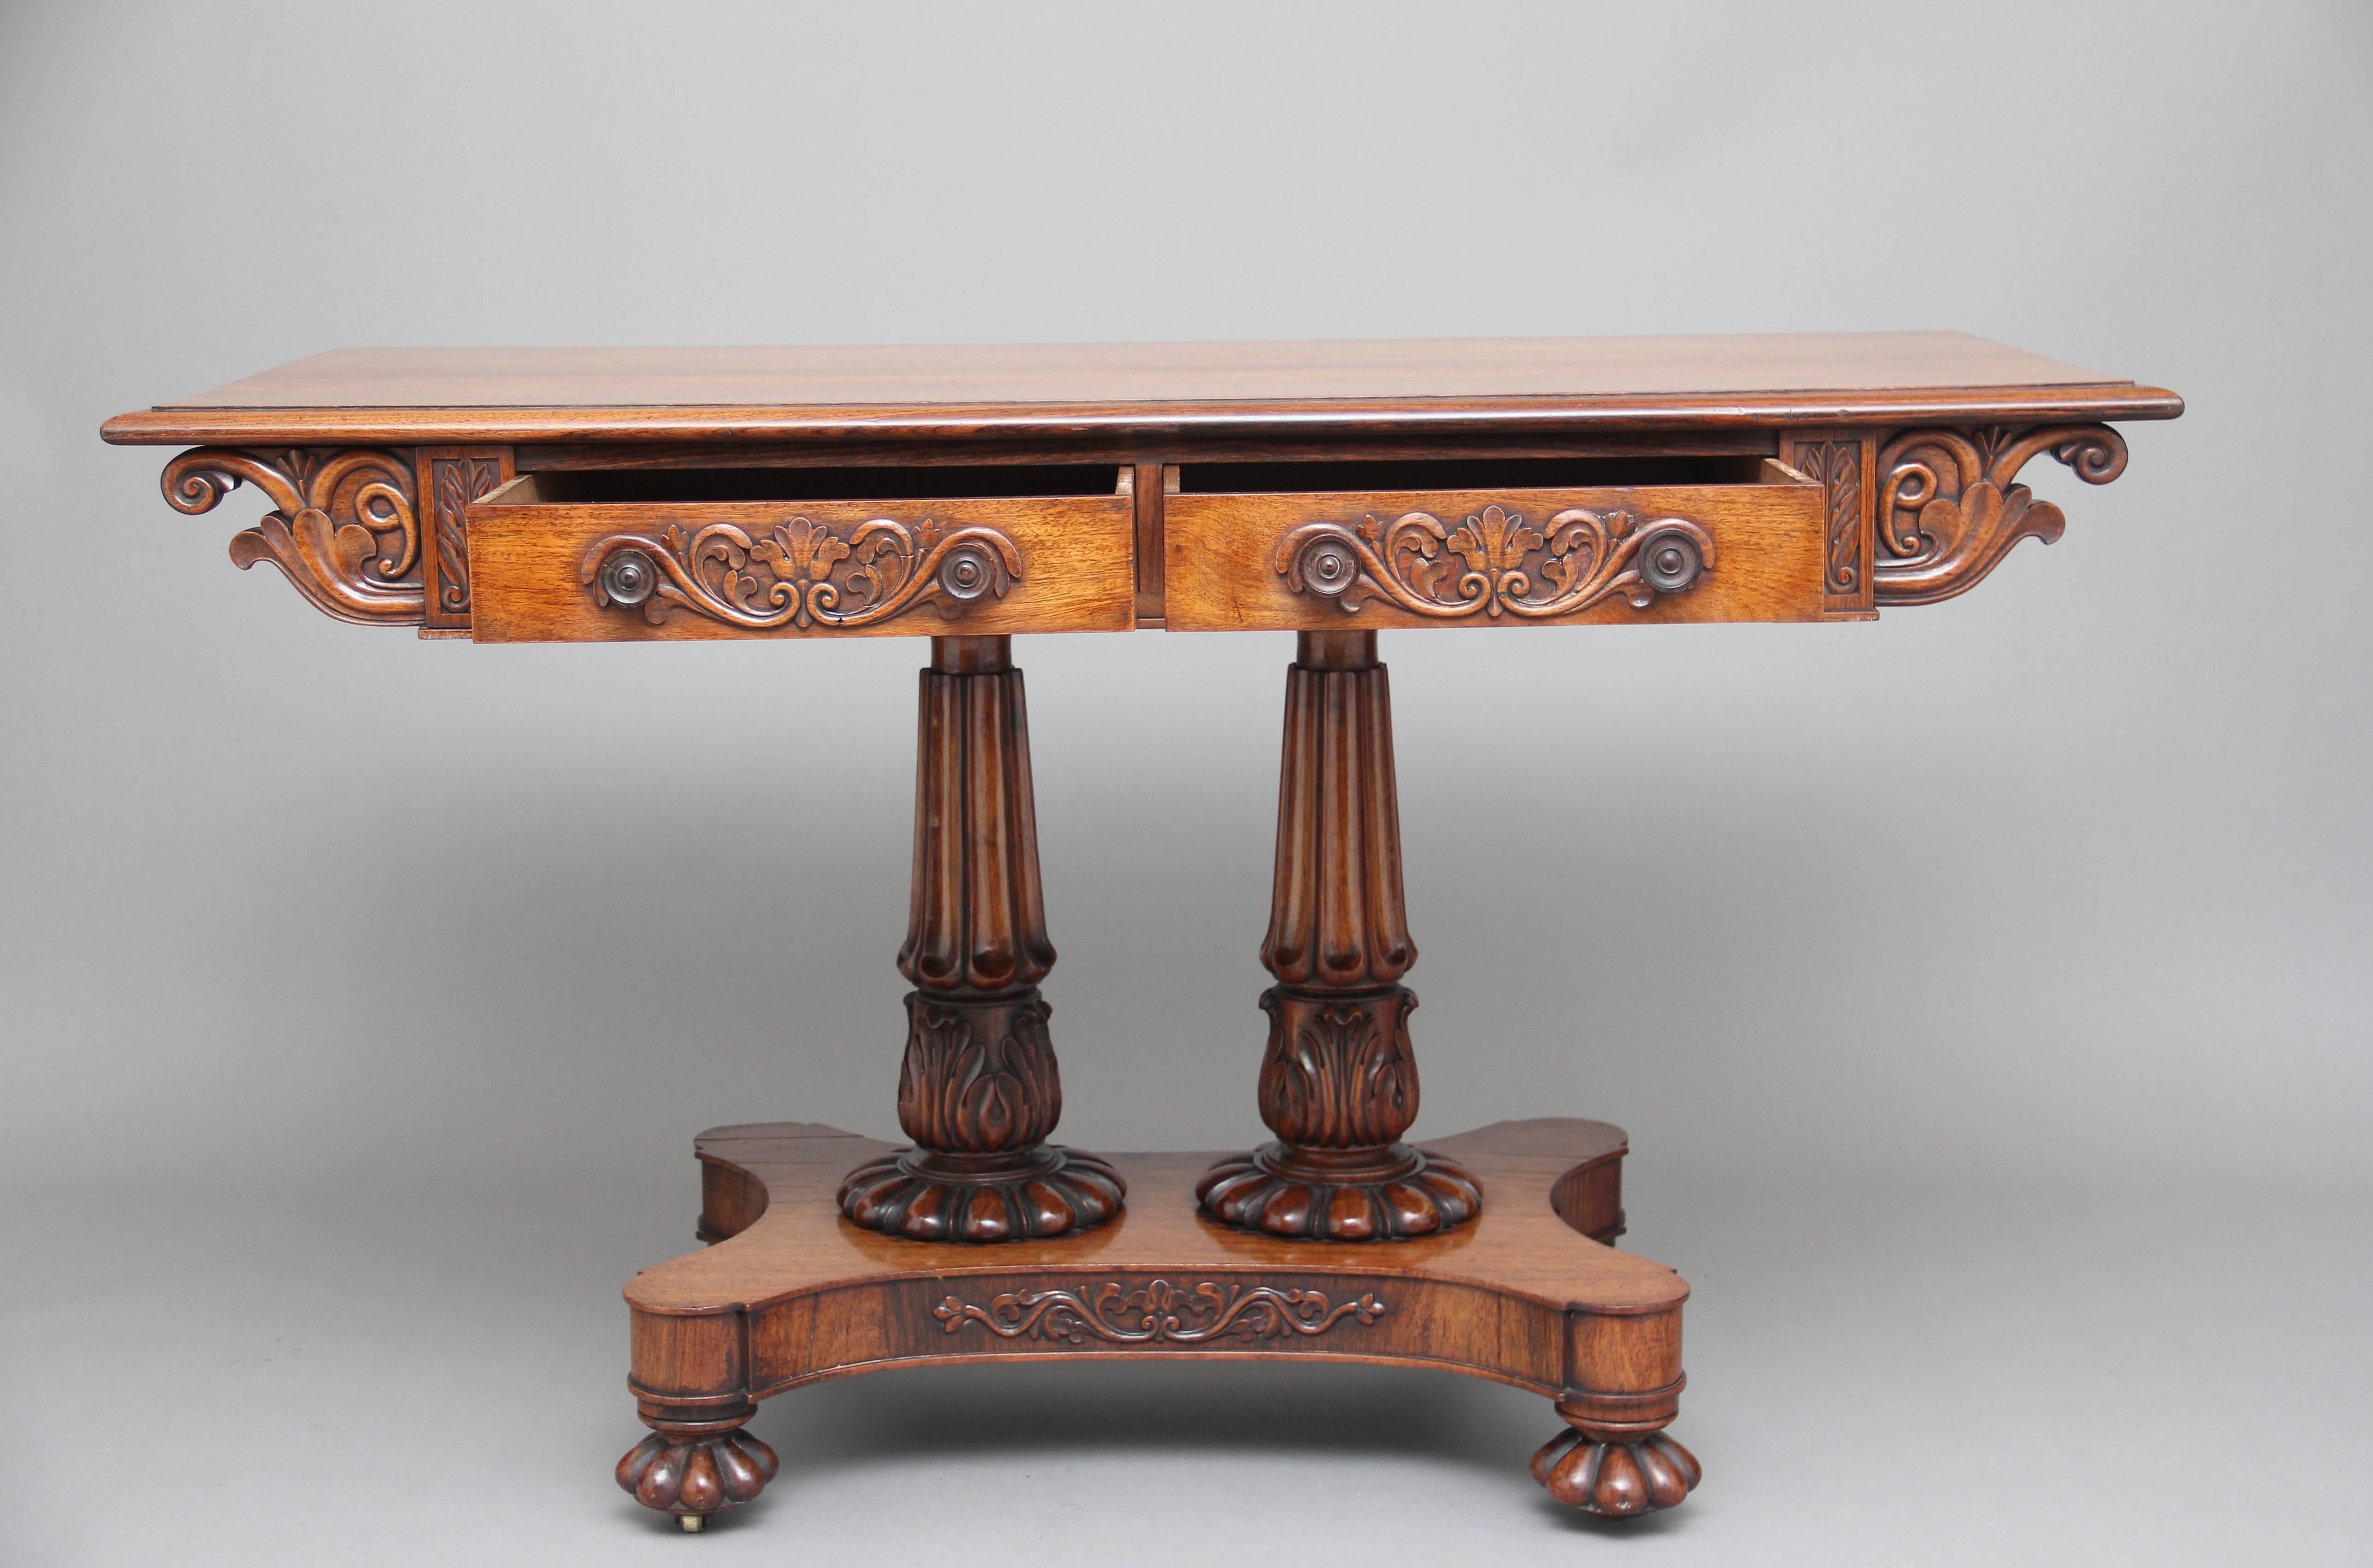 19th century Anglo-Indian teak sofa / writing table, the moulded edge top above two oak lined drawers with wonderfully carved floral decoration on the drawer fronts, original turned wooden knob handles, either side having carved leaf corner